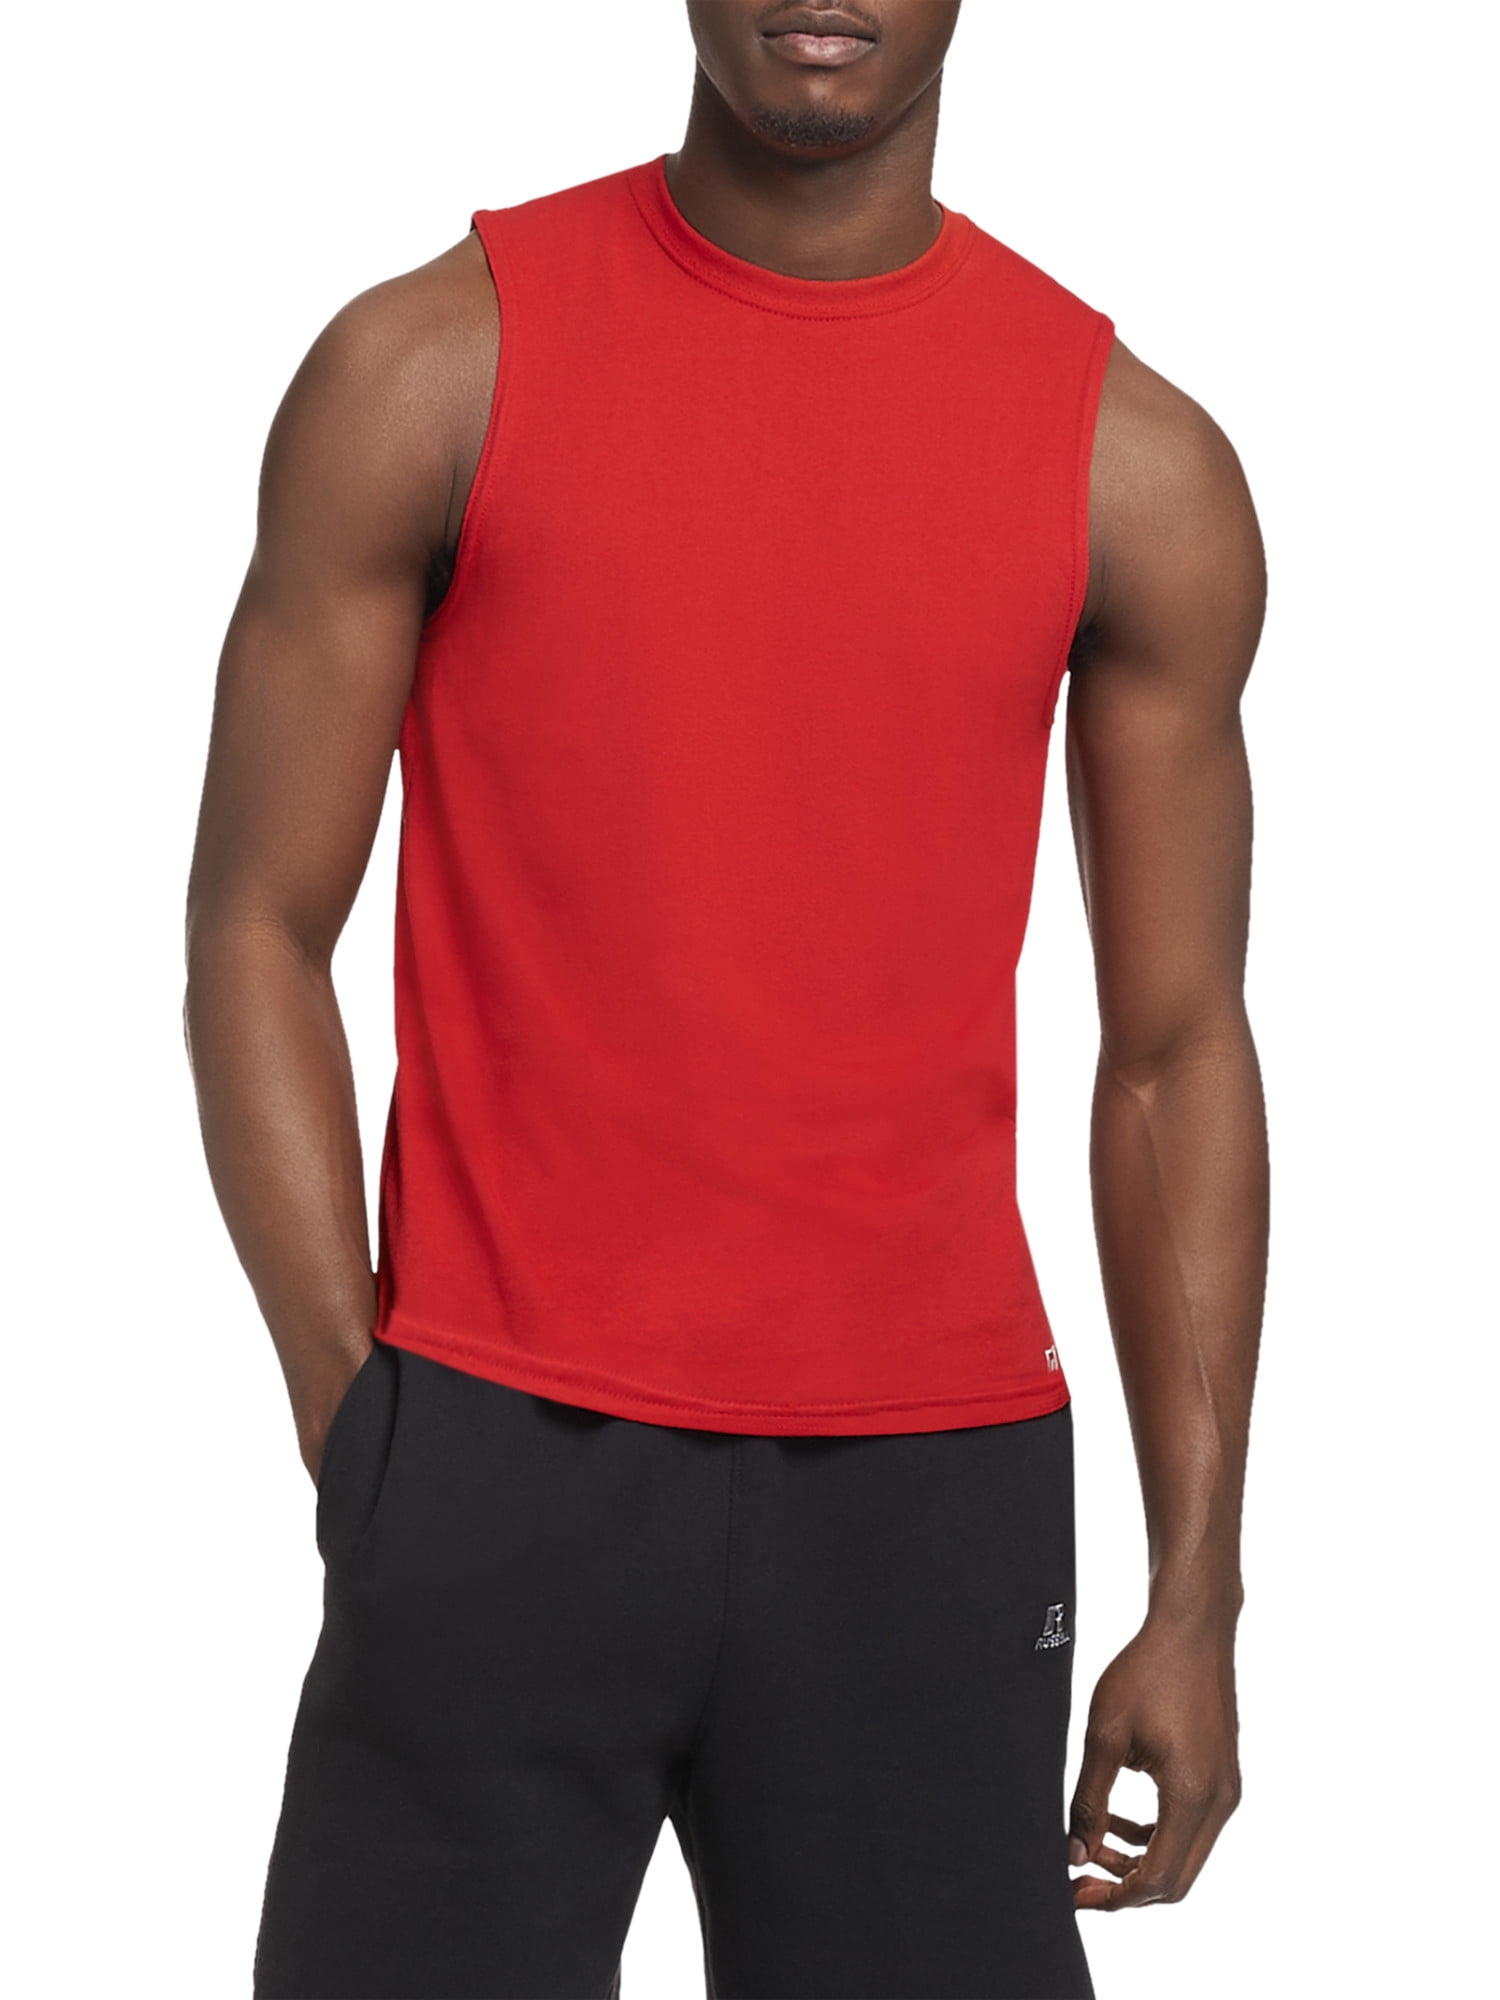 Russell Athletic Men's Cotton Performance Muscle Tank Top - Walmart.com